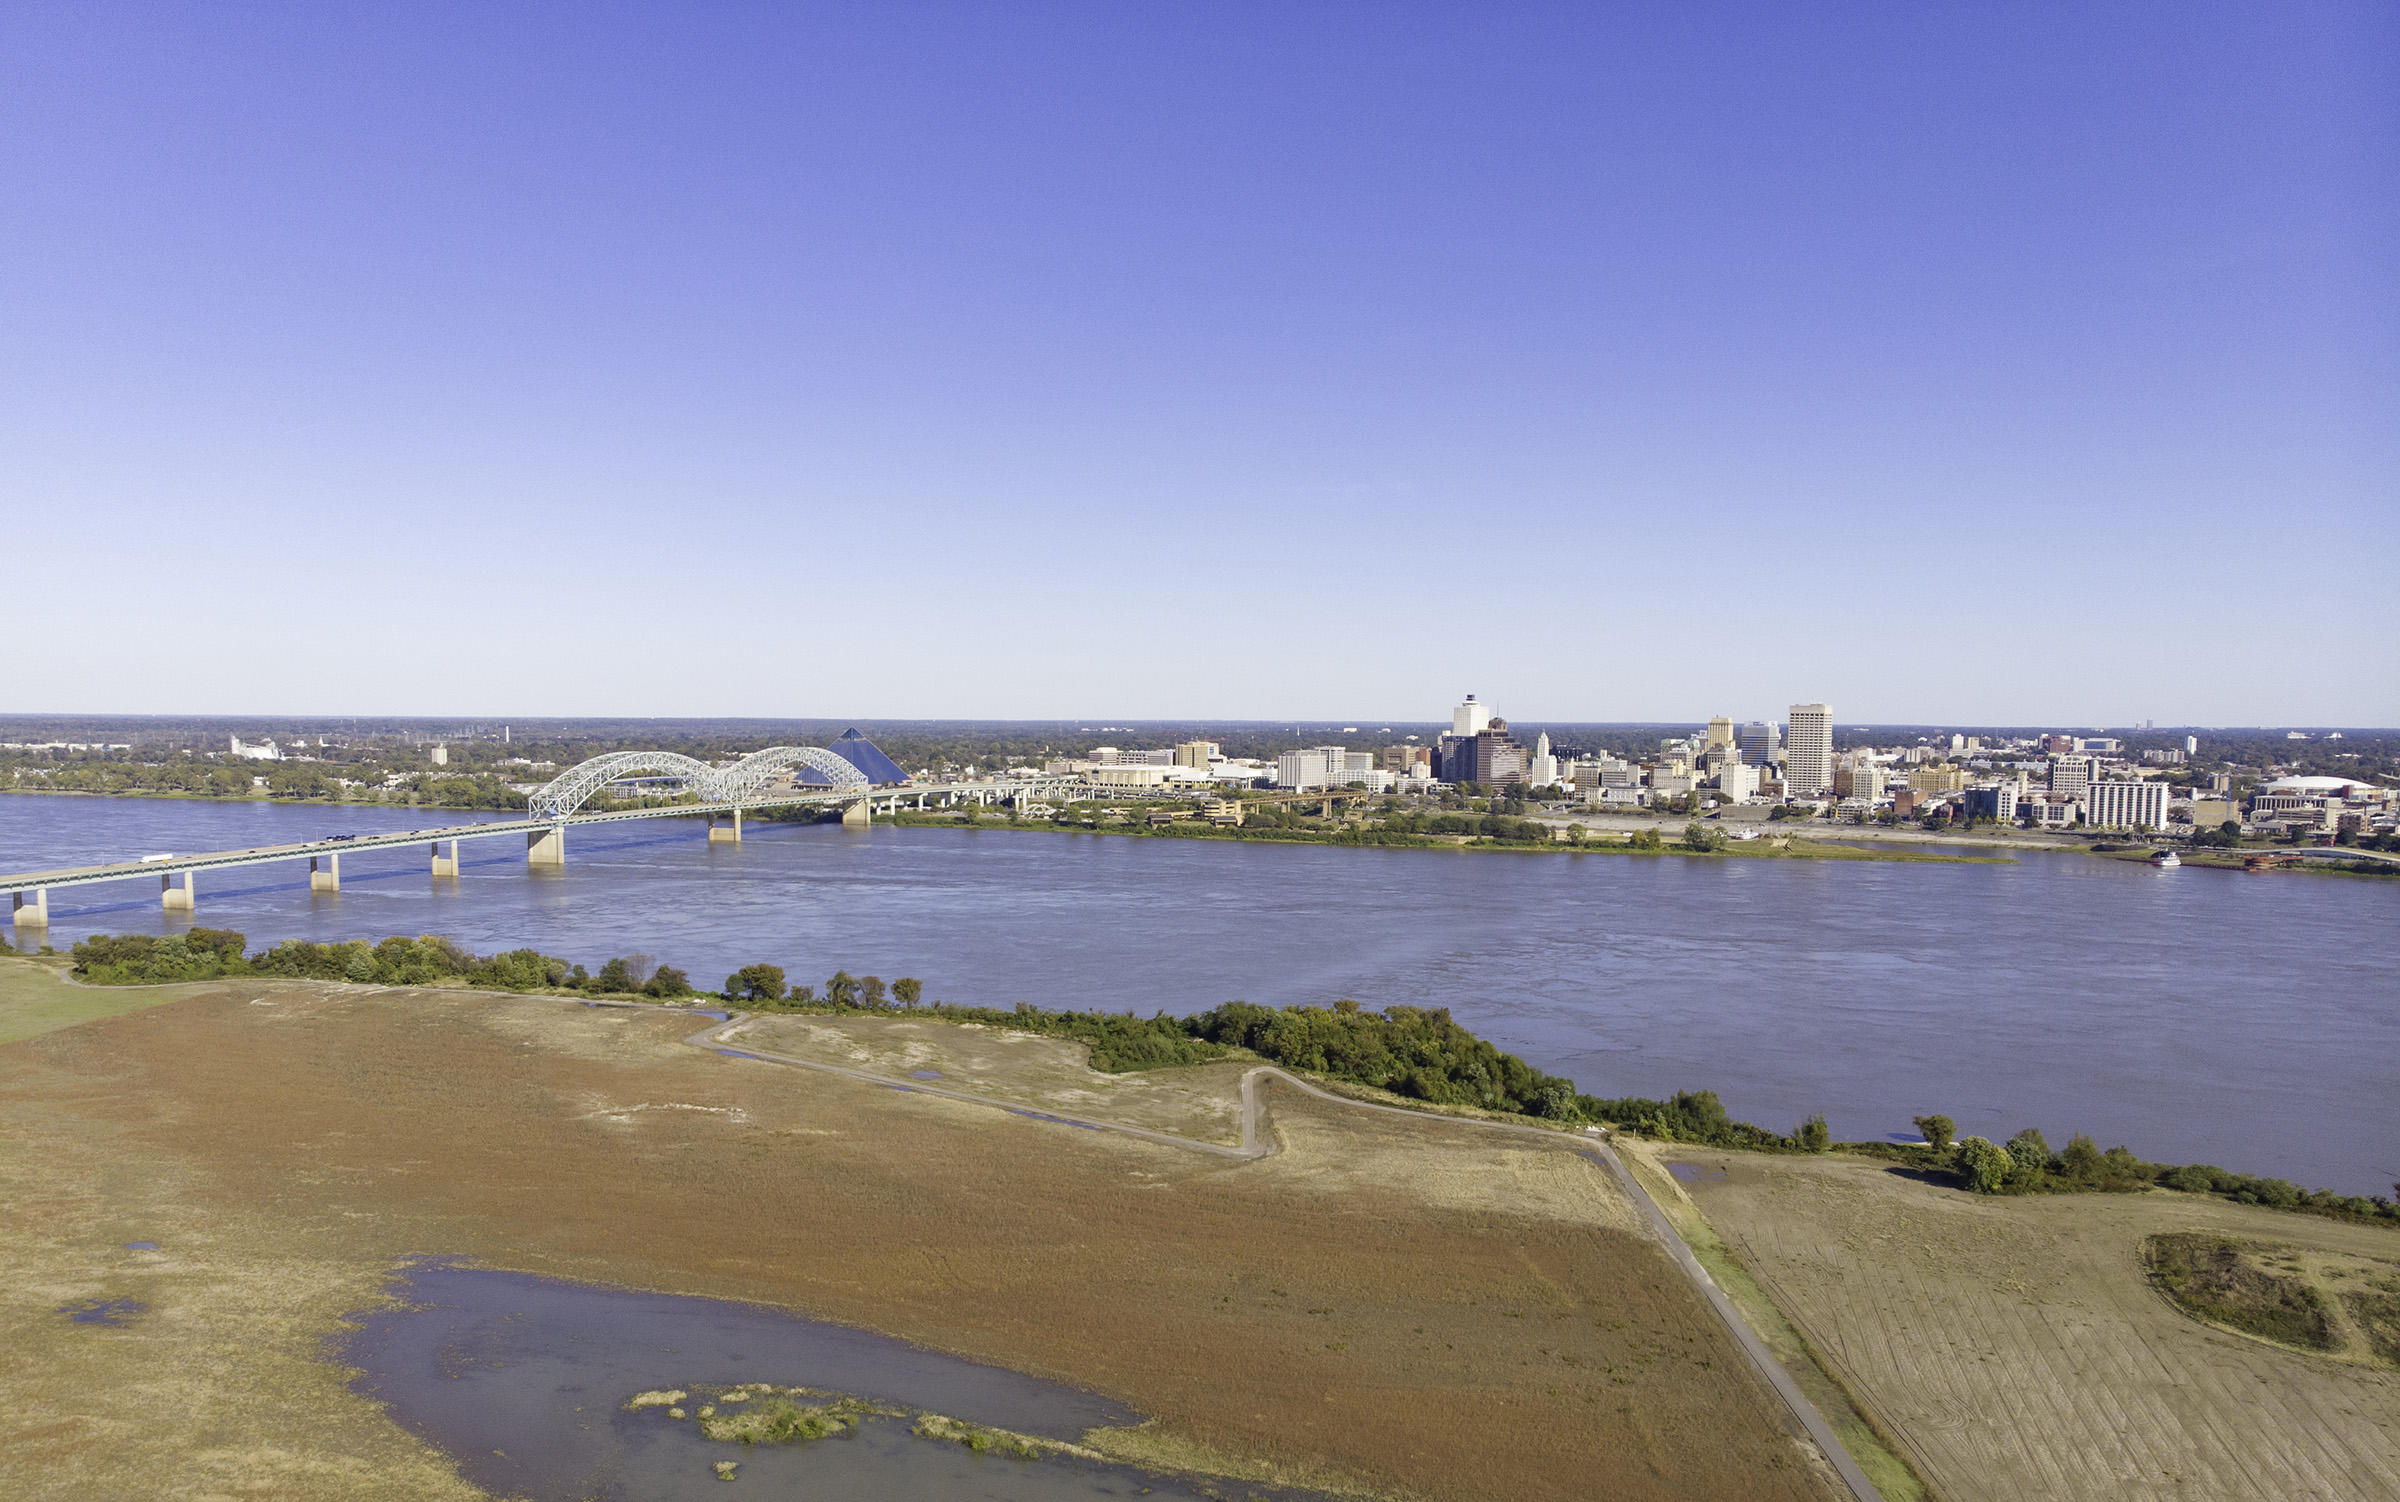 Drone view of Bridge Over Mississippi River at Memphis, Tennessee